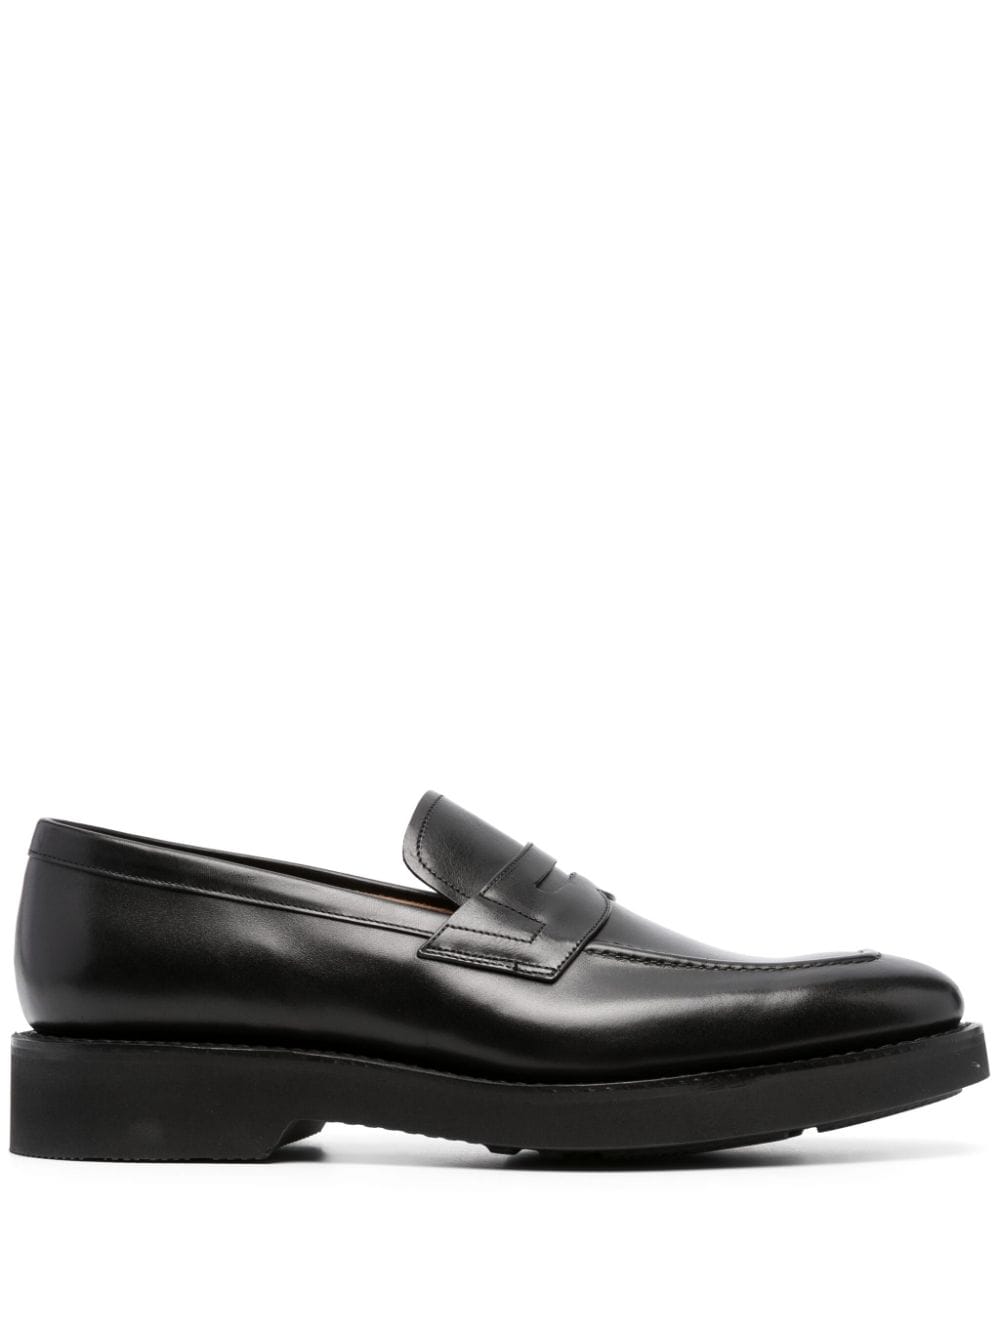 CHURCH'S PARHAM L LEATHER LOAFERS